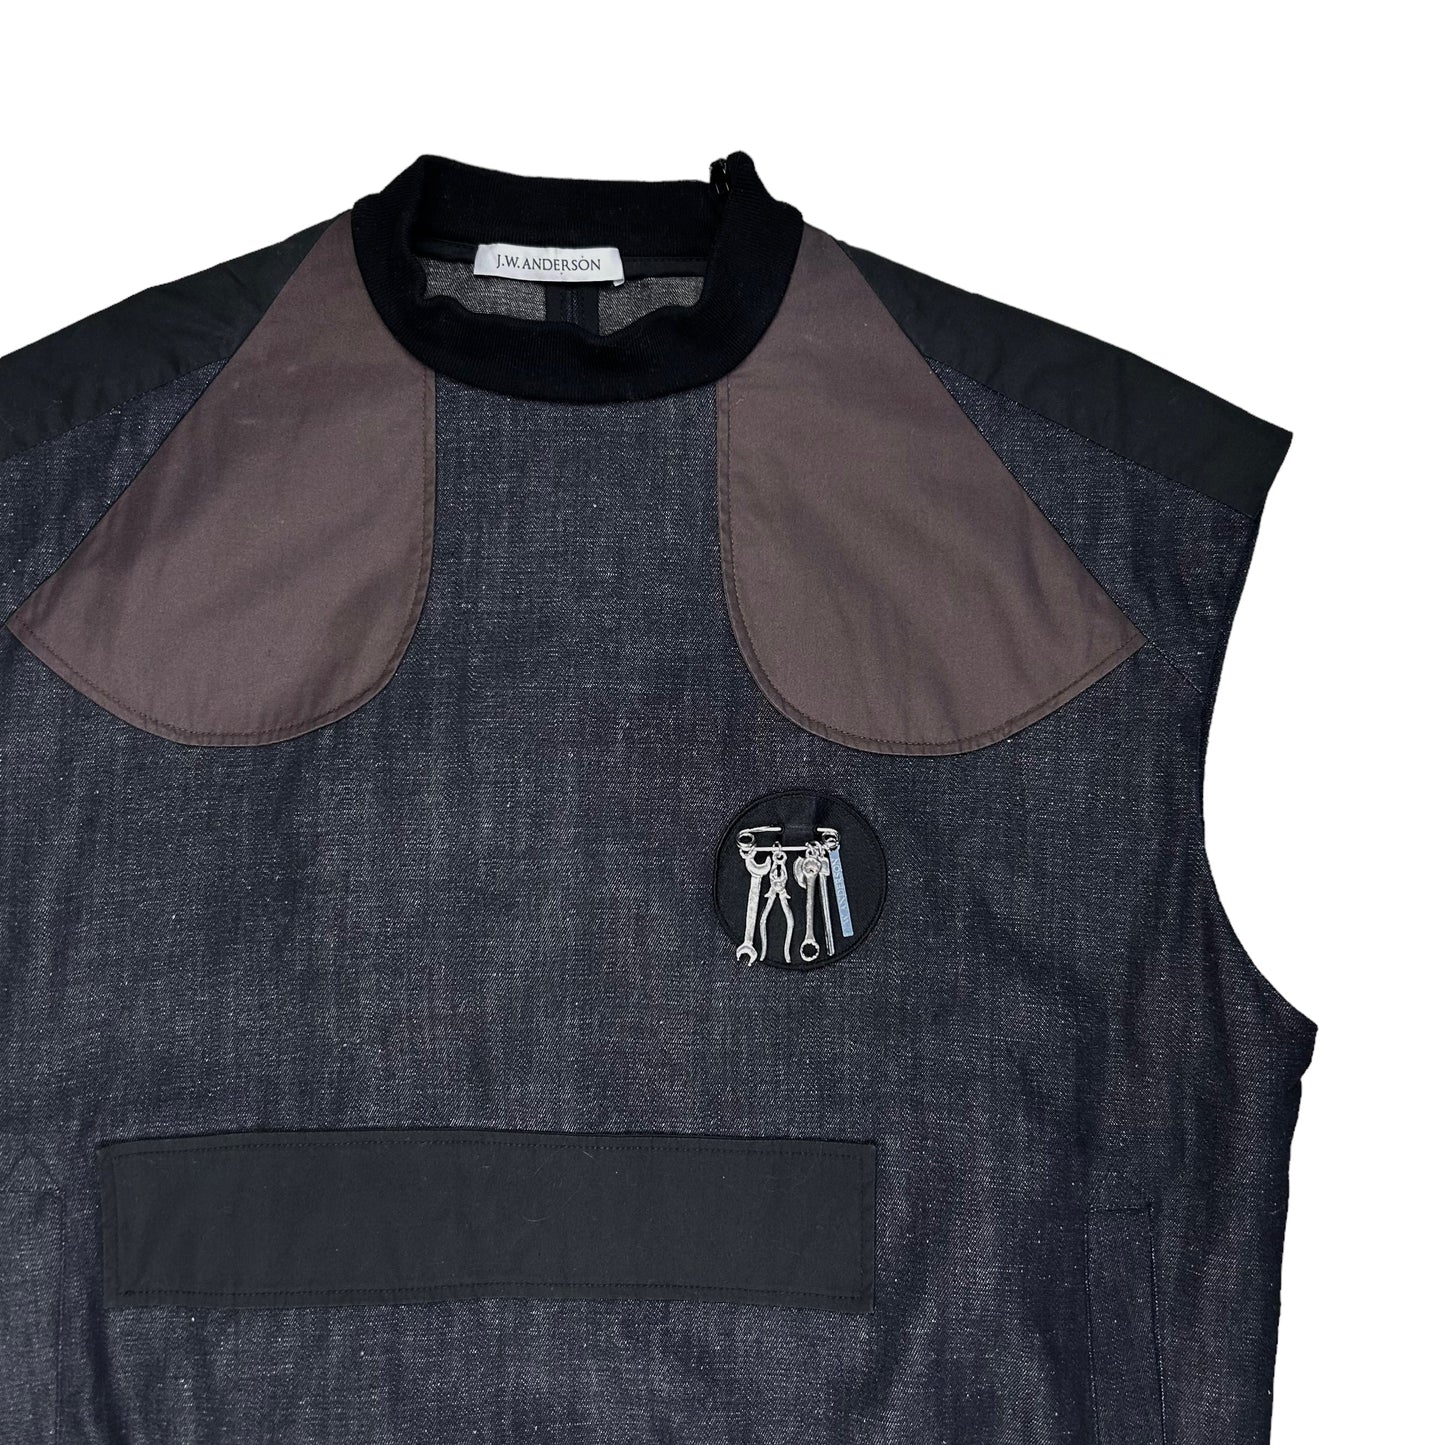 JW Anderson Safety Pin Tool Vest - SS16